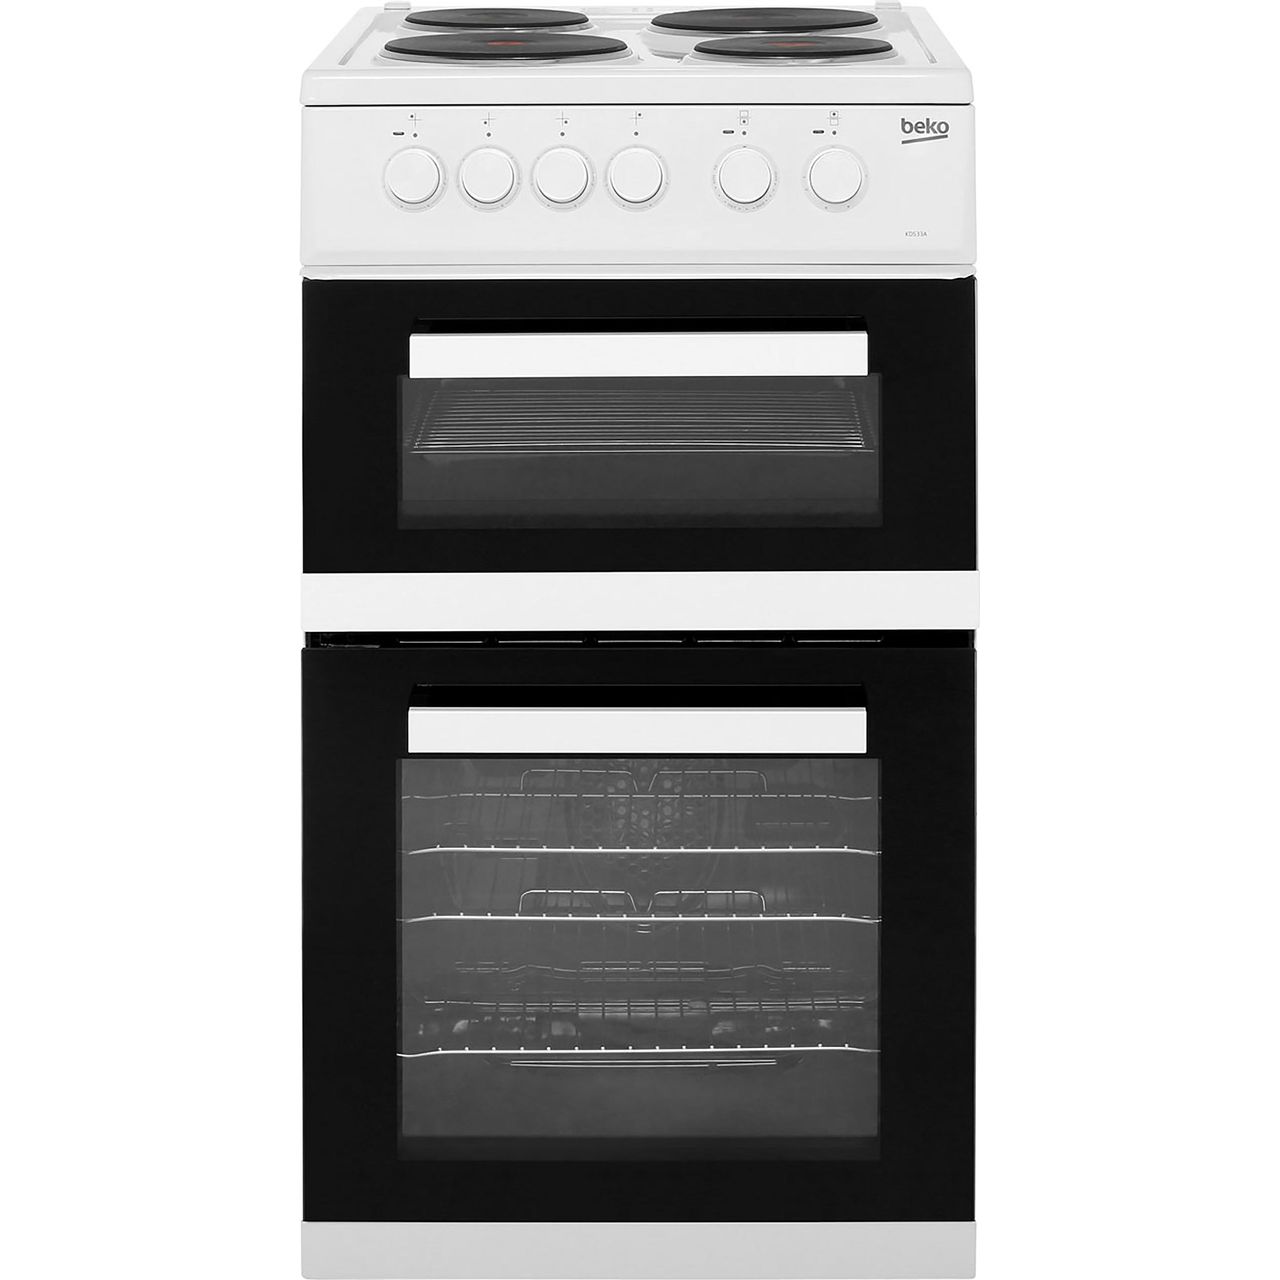 Beko KD533AW 50cm Electric Cooker with Solid Plate Hob Review